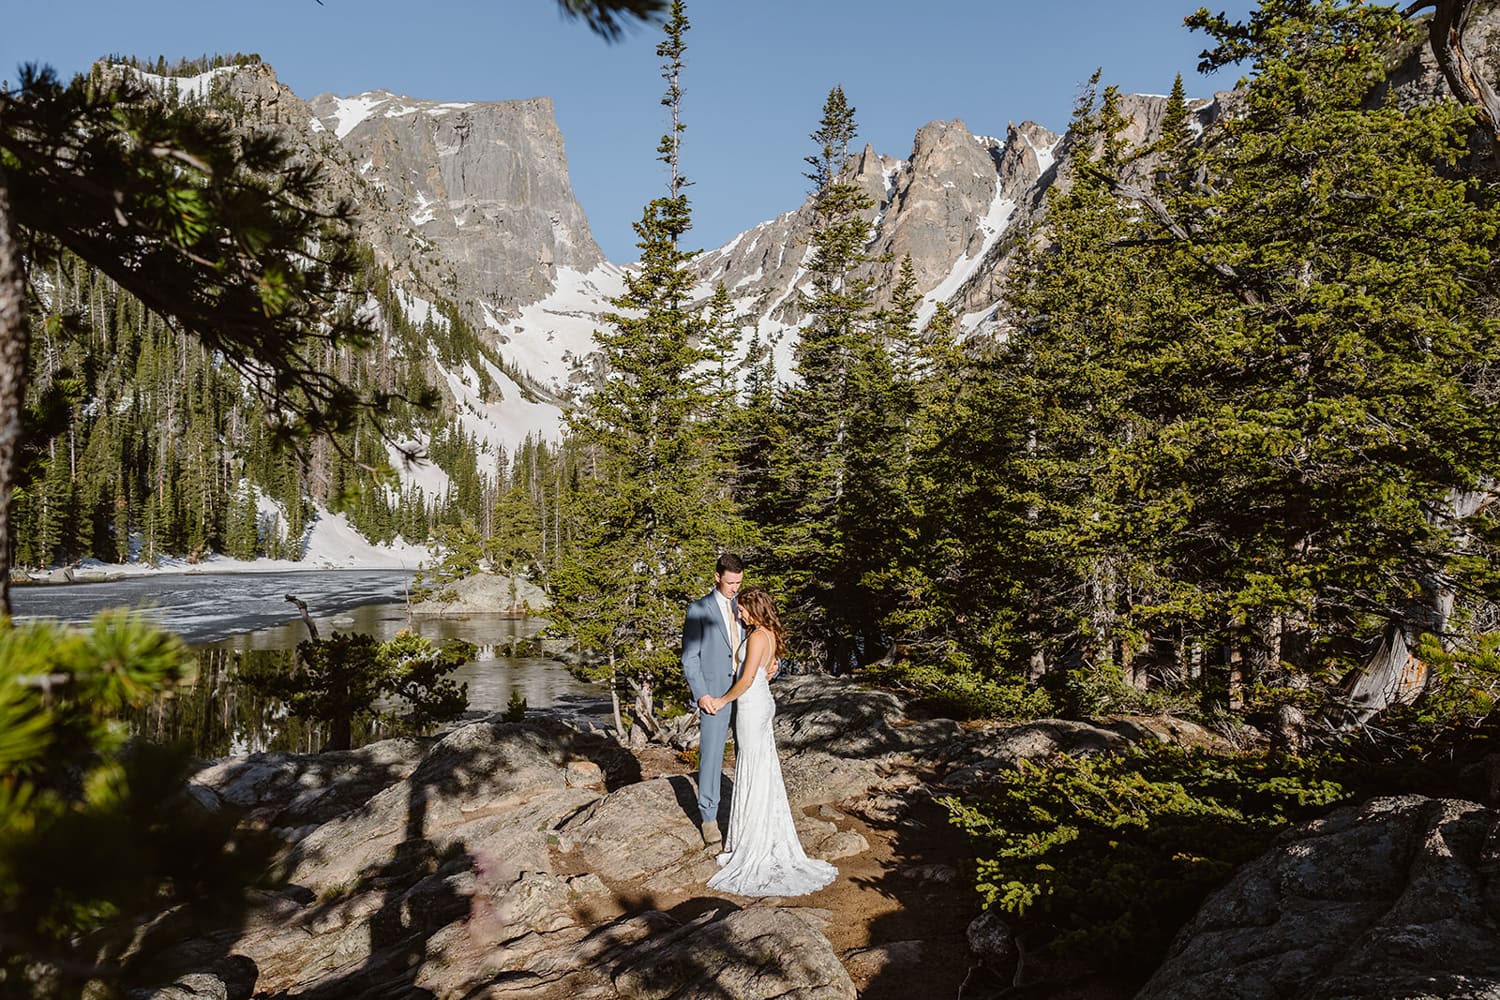 Bride and groom at Dream Lake for their Rocky Mountain National Park elopement.